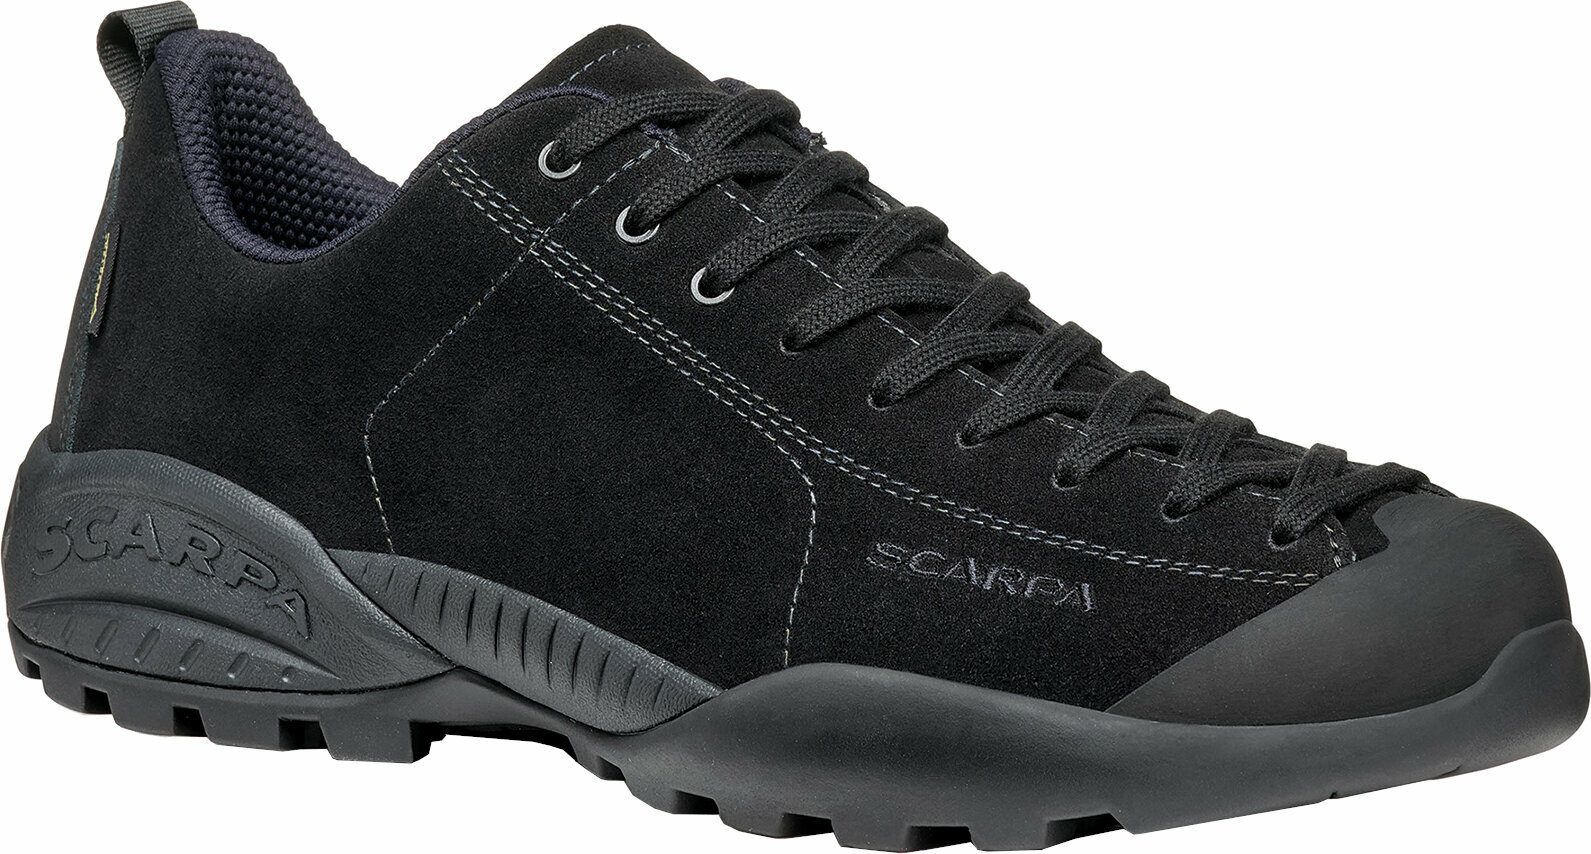 Chaussures outdoor hommes Scarpa Mojito GTX Black 42,5 Chaussures outdoor hommes